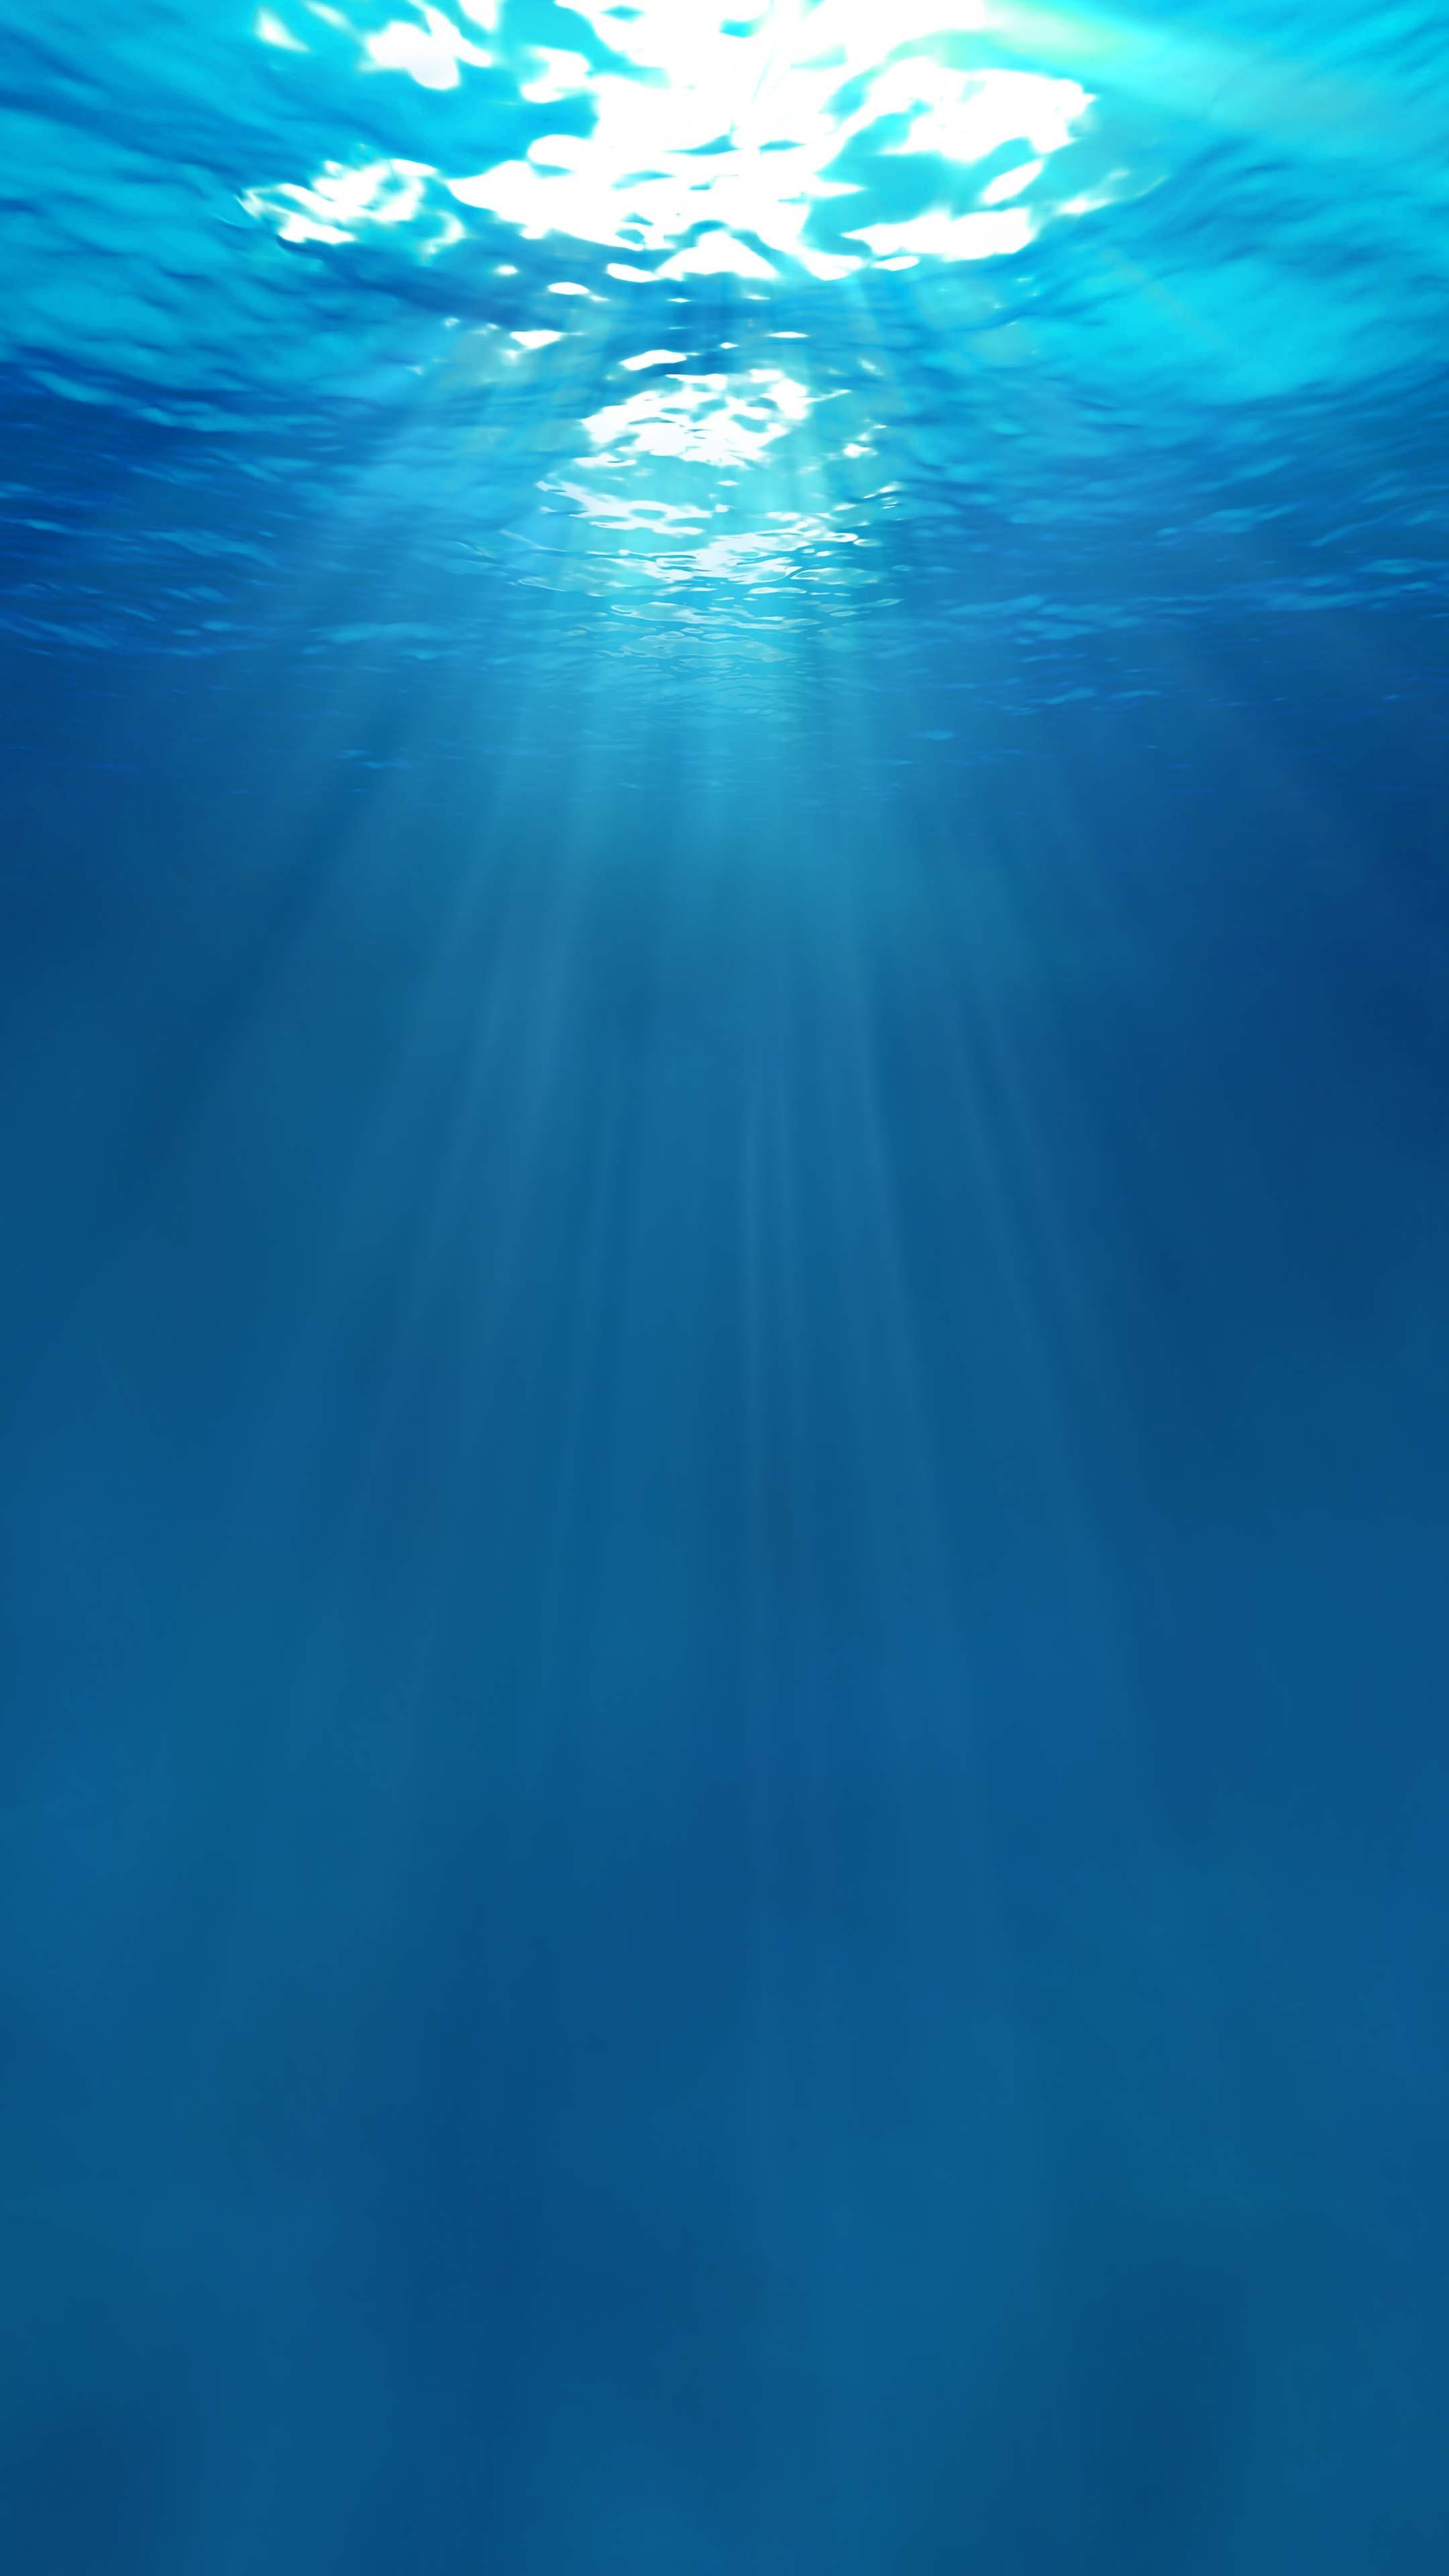 A sun ray is shining through the water - Water, underwater, ocean